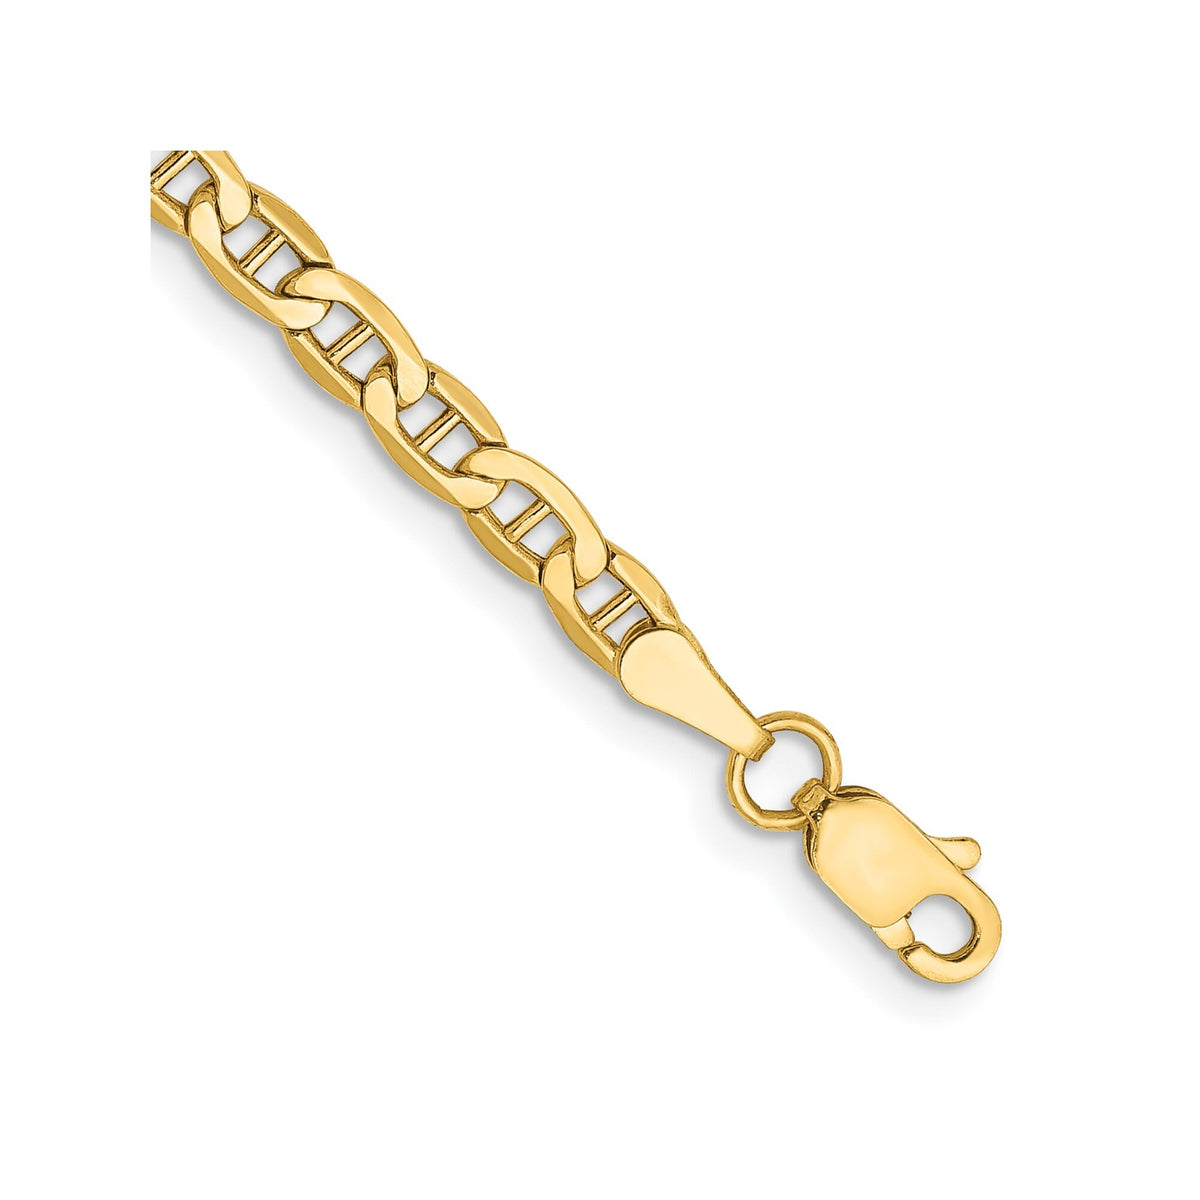 14k Yellow Gold Anchor Chain Anklet 3.2mm Gold Ankle Bracelet - Gift Box Included - Genuine 14k Gold (Not Plated or Filled)